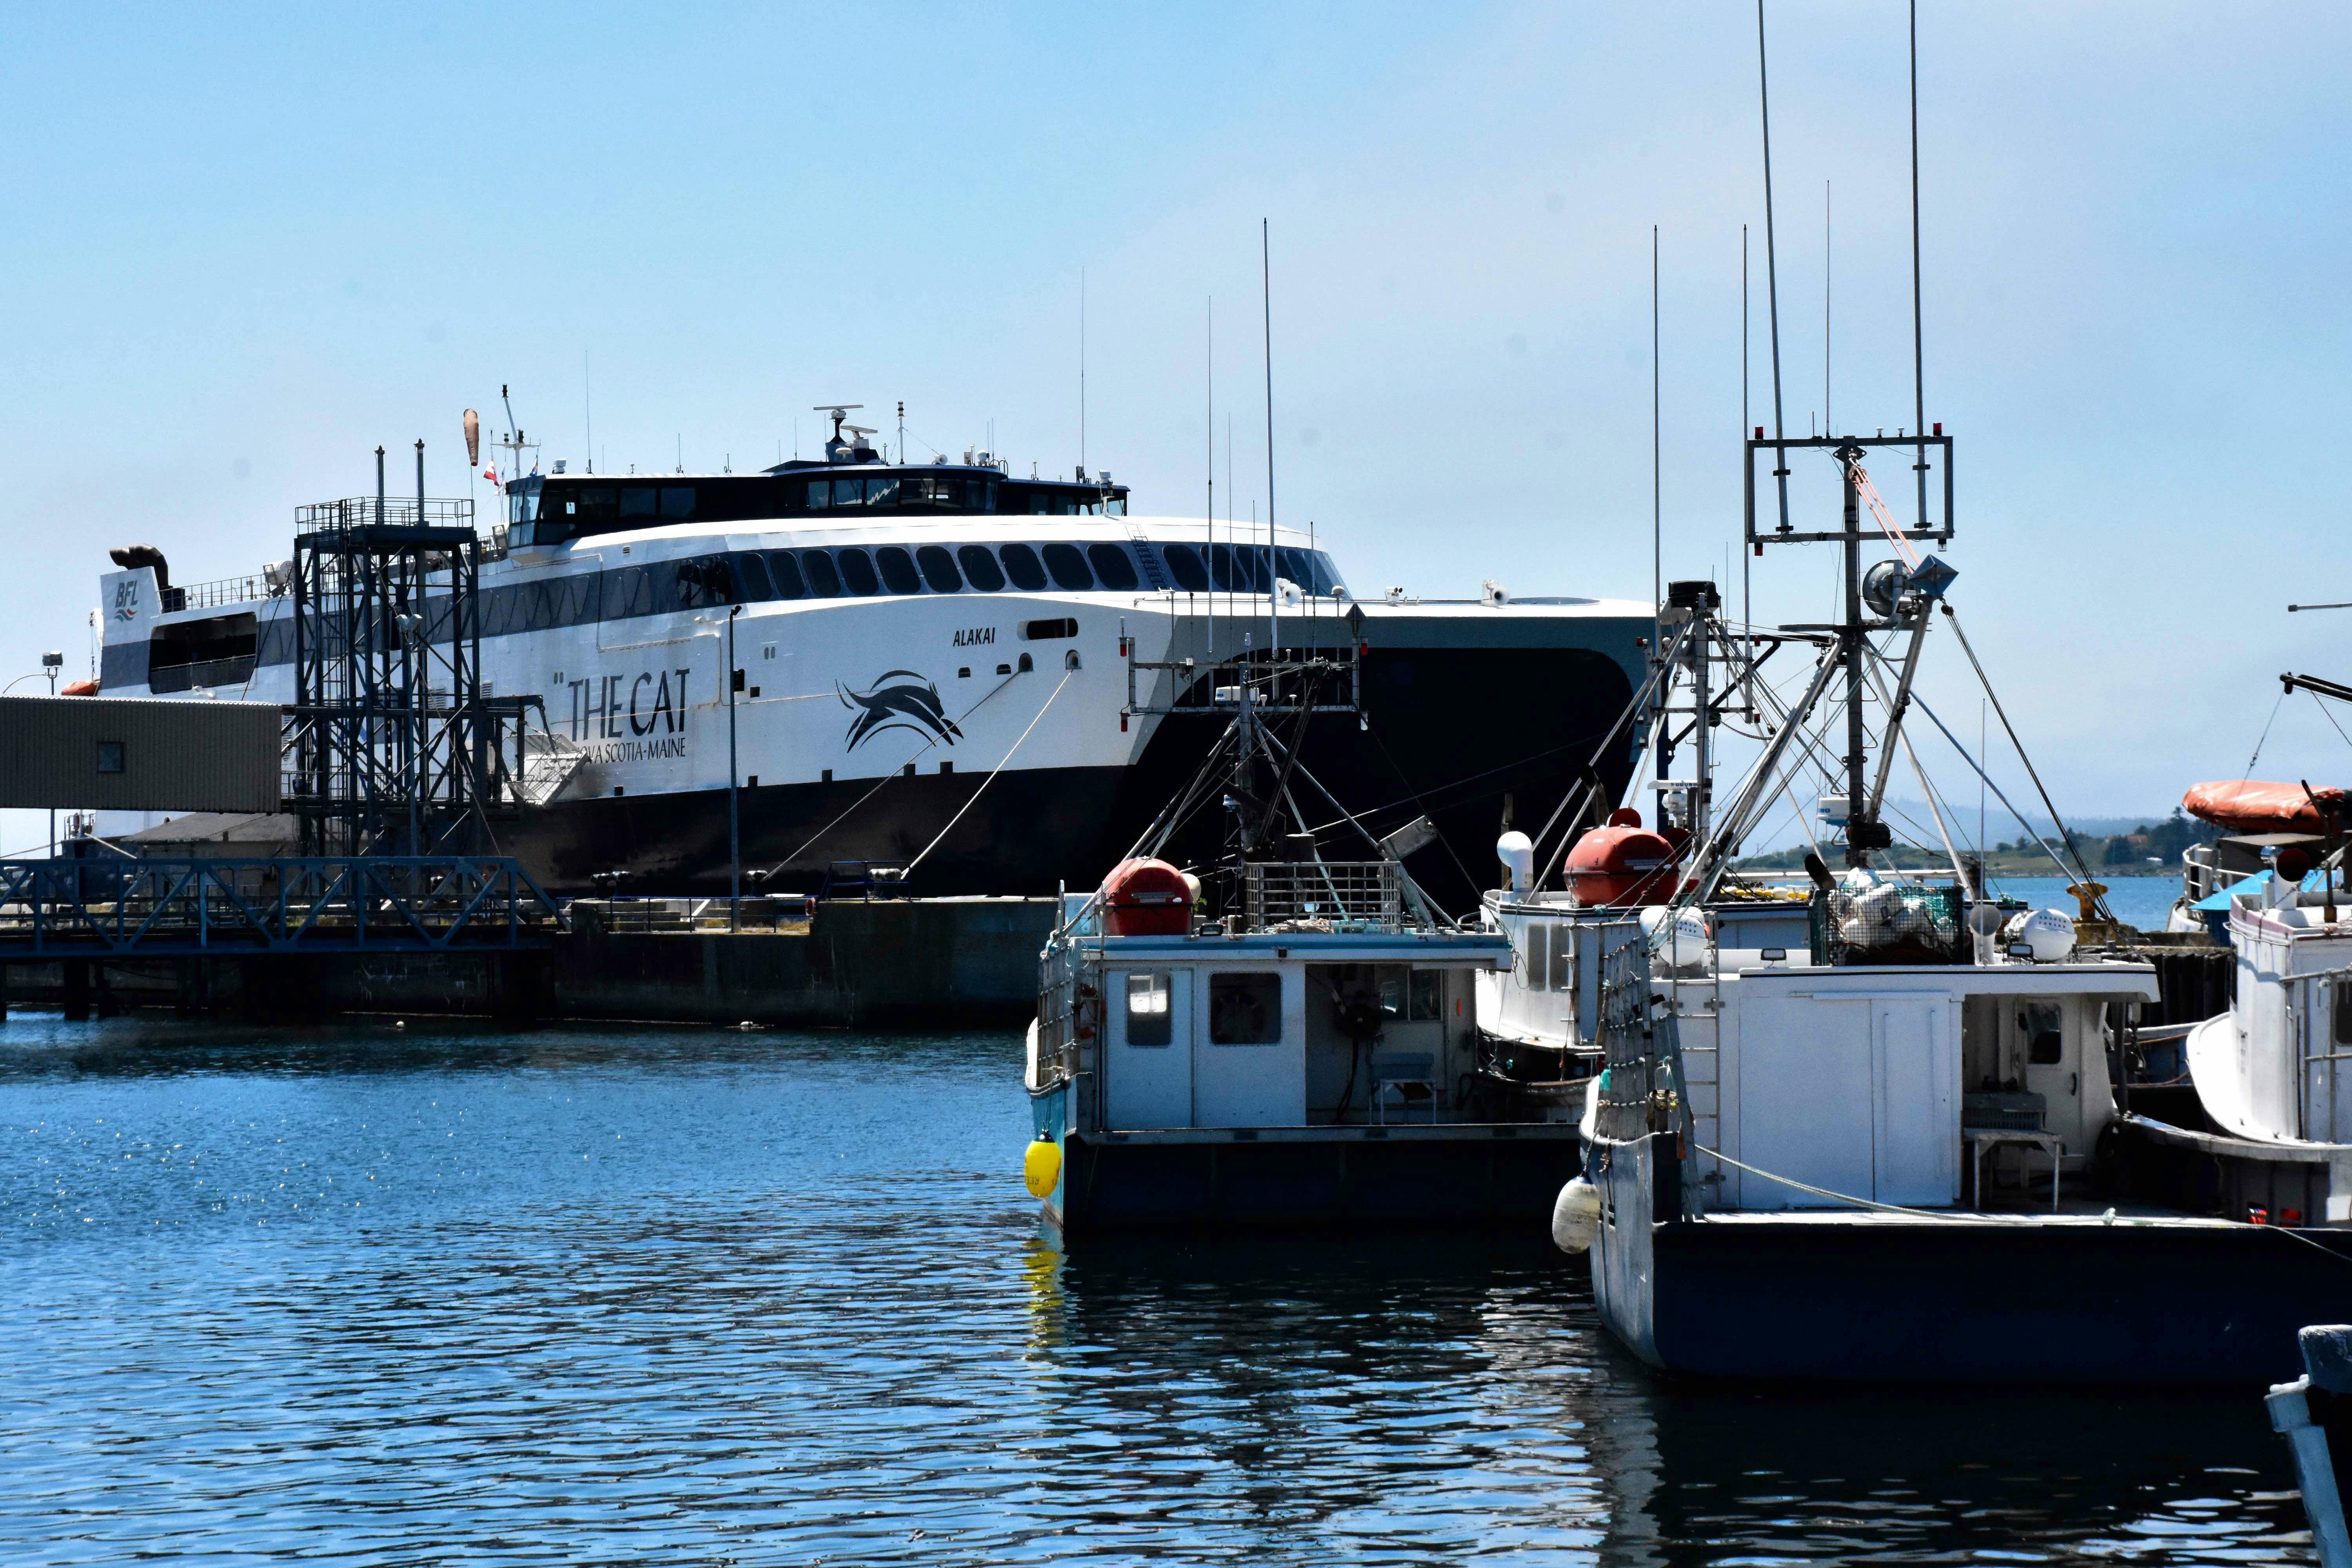 Bay Ferries says it is refunding all sailings that have been booked on The Cat and it is no longer accepting new reservations for the 2019 sailing season until there is a definitive answer of when the ferry will sail.